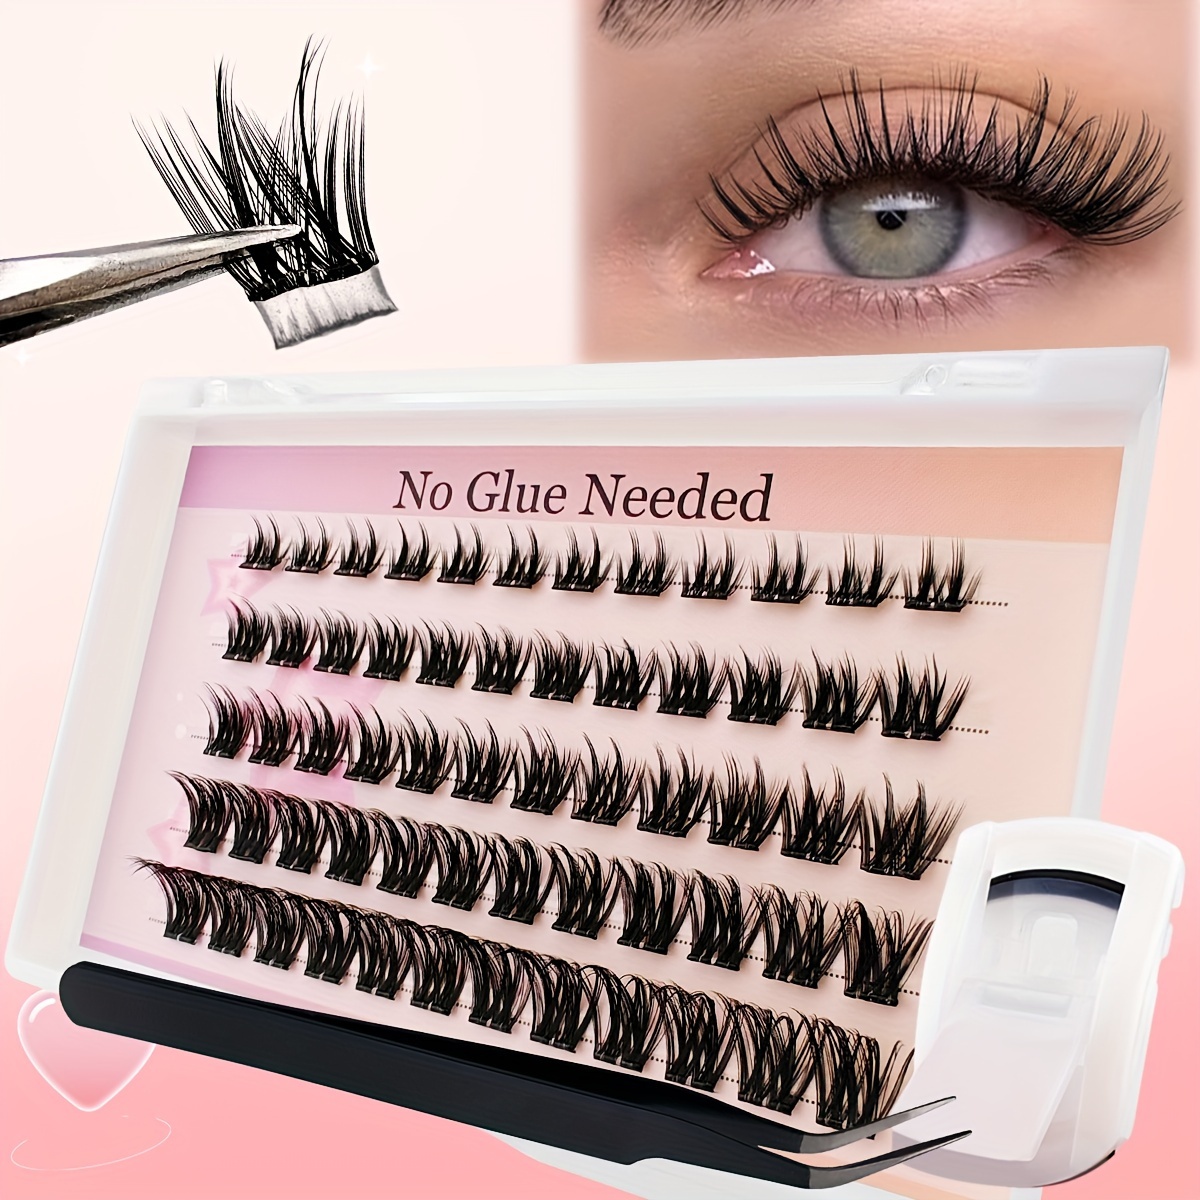 

Self Adhesive Lash Clusters Kit D+ Press-on Diy Lash Extension Reusable Cluster Lashes Fuss Free No Sticky Residue Self Application At Home 8-16mm 60 Pcs